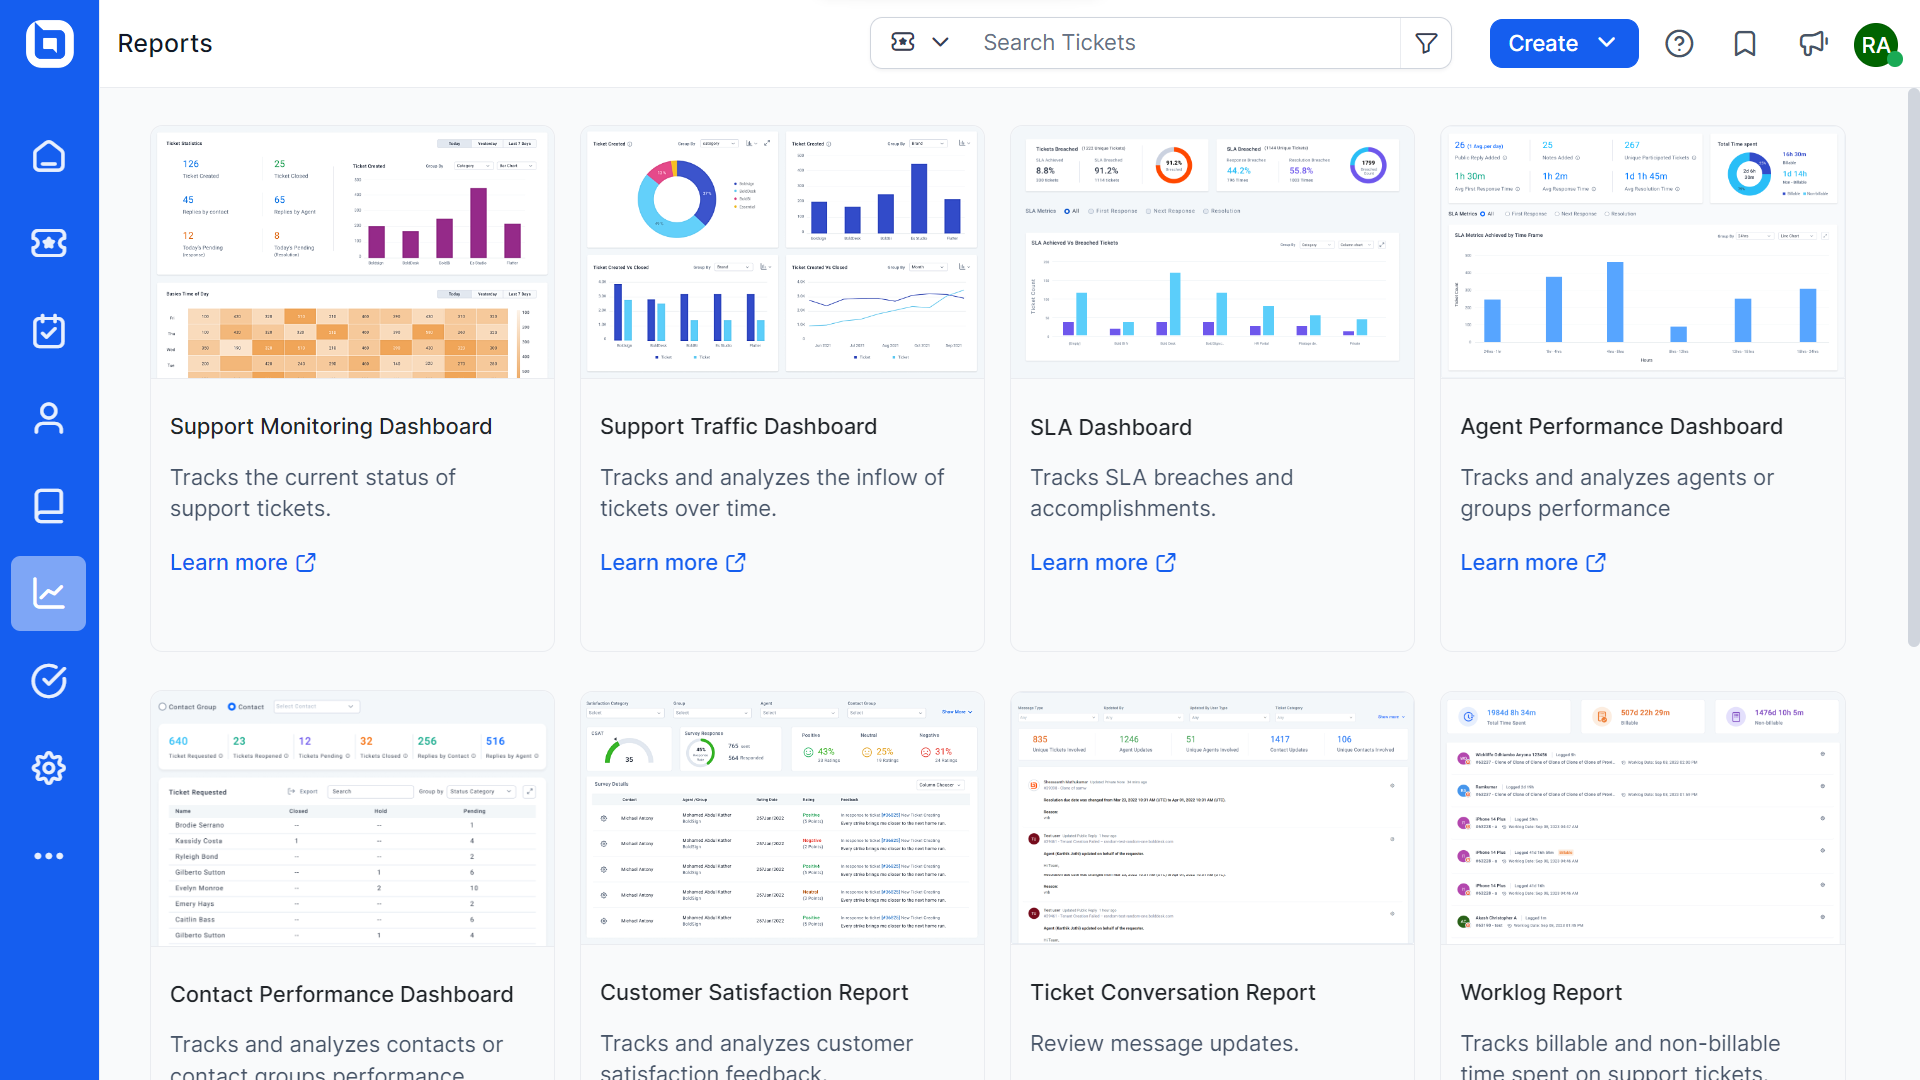 Using the built-in reports and dashboard, analyze insightful real-time data to make informed decisions about improving your customer service.